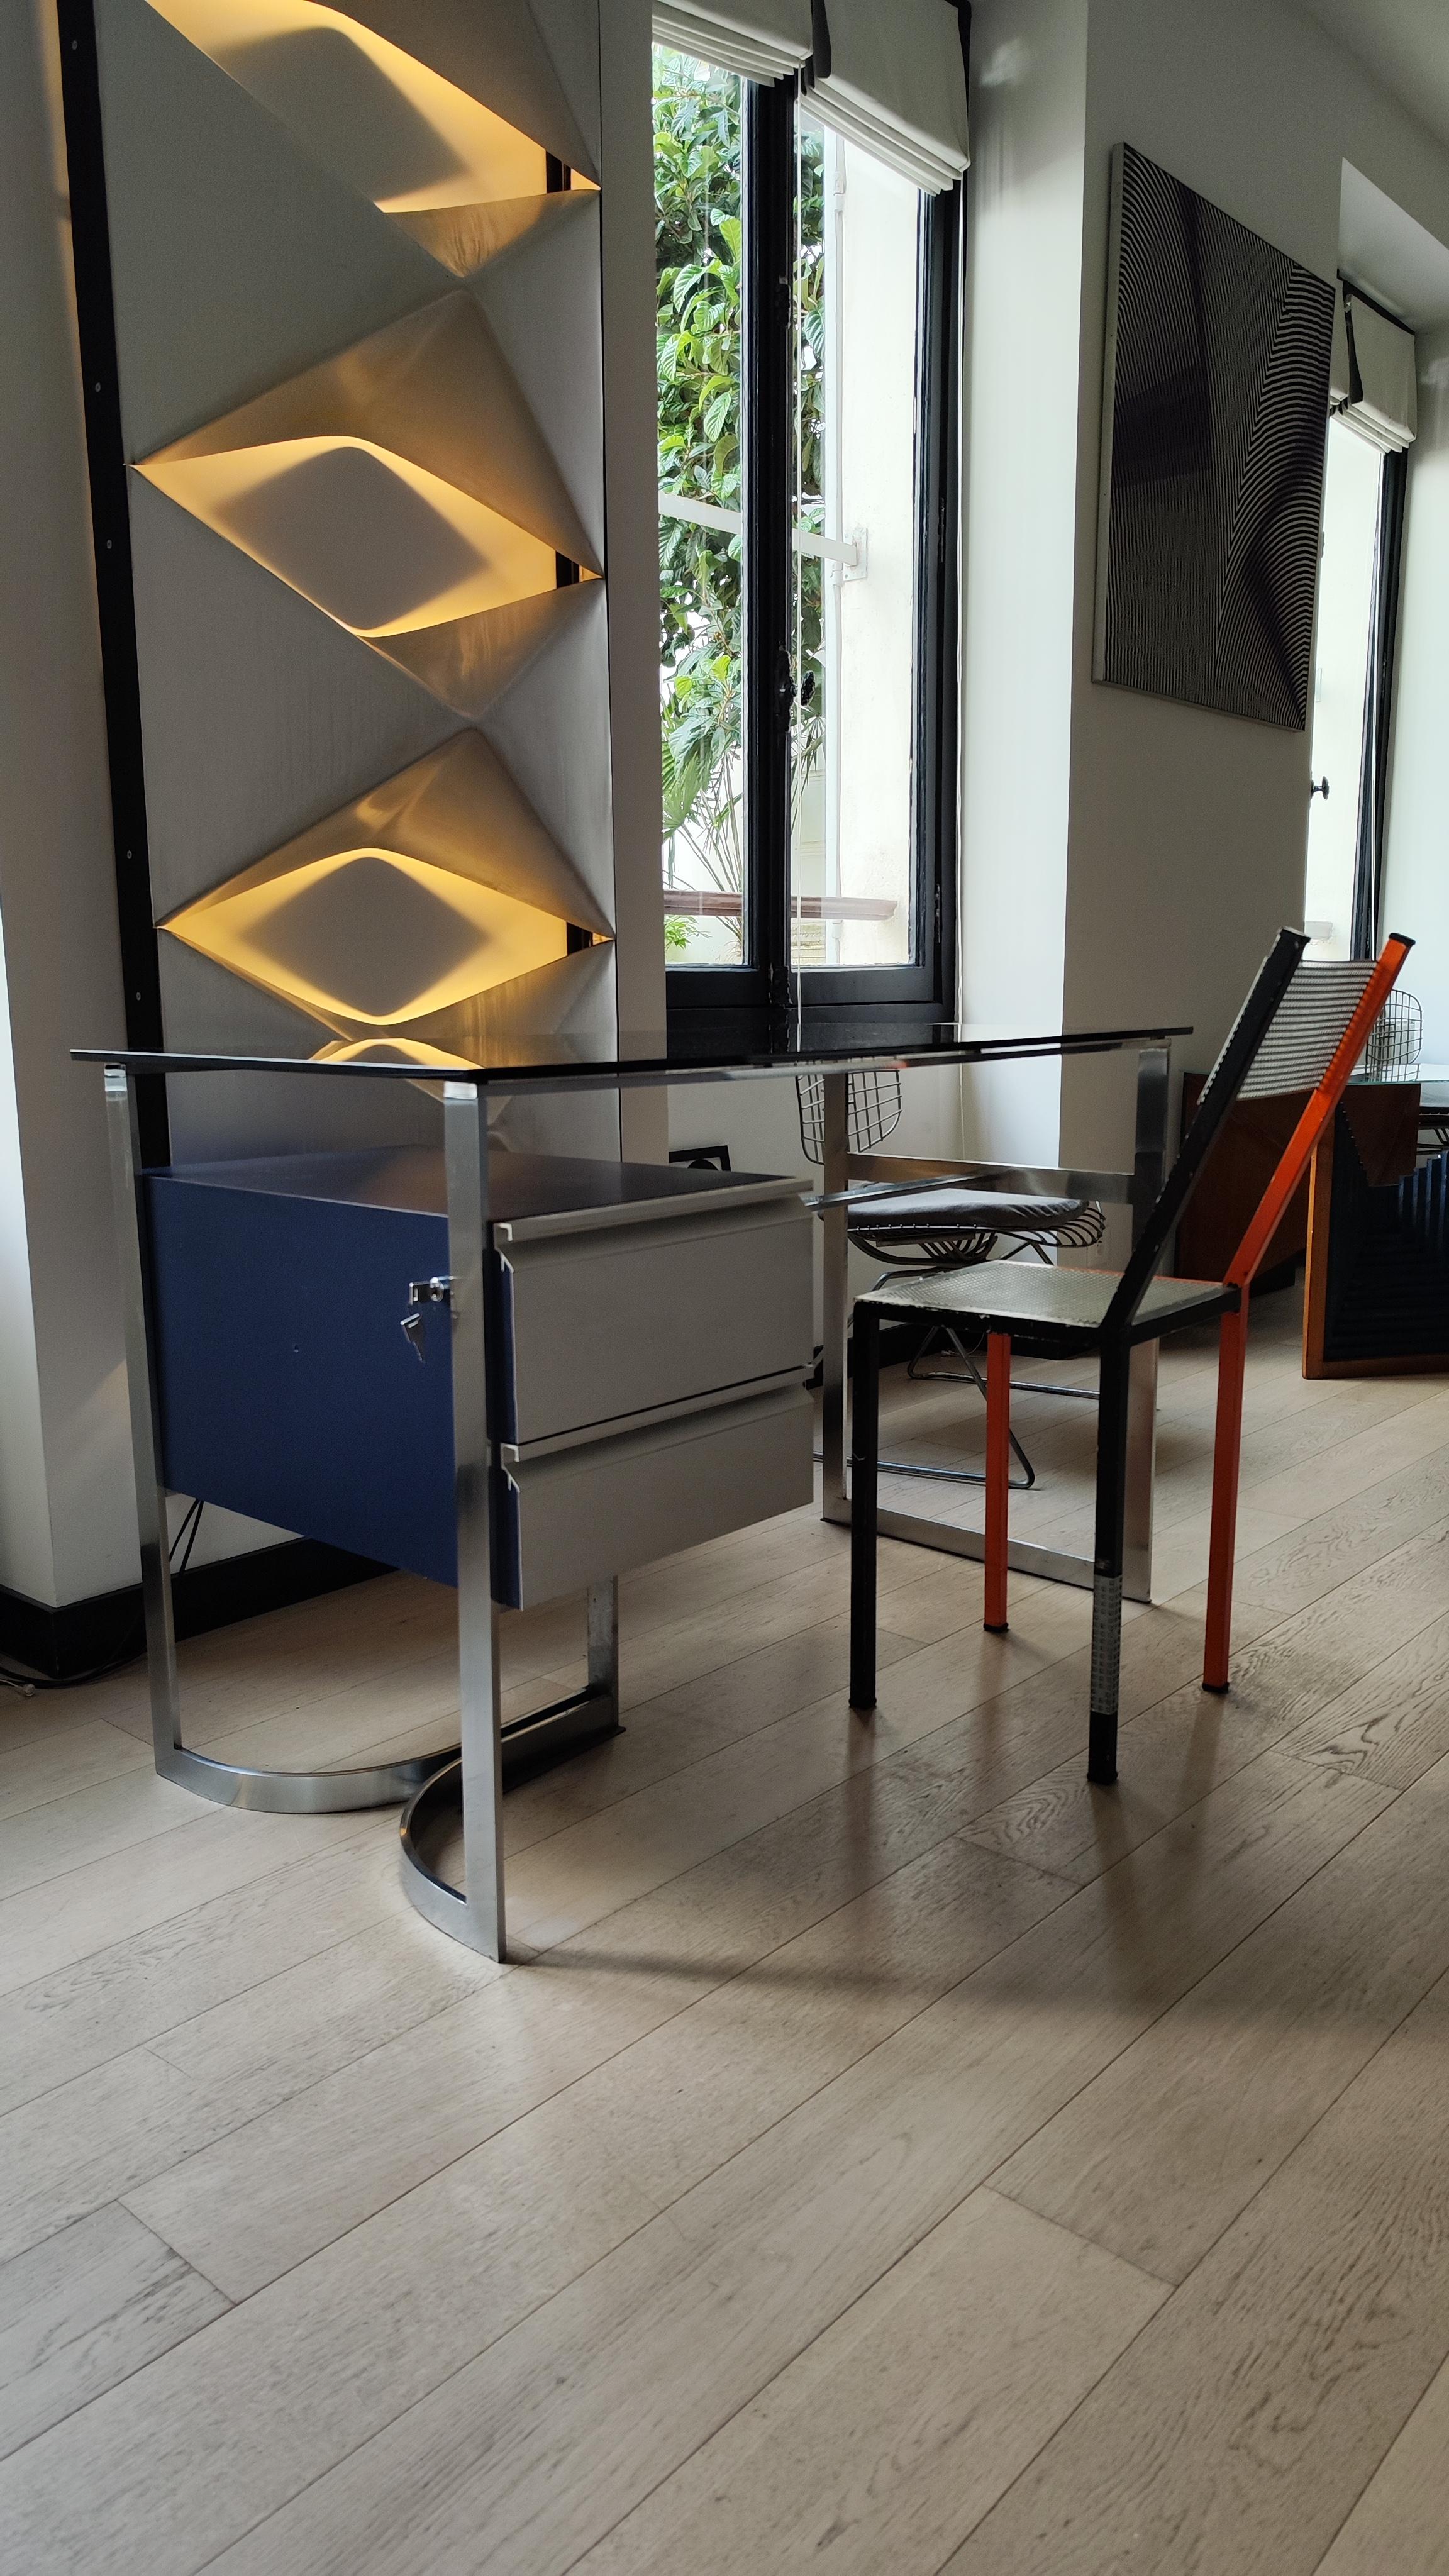 Italian Patrice Maffei Desk for Kappa, 70s, Brushed Stainless Steel, Smoked Glass, 1970 For Sale